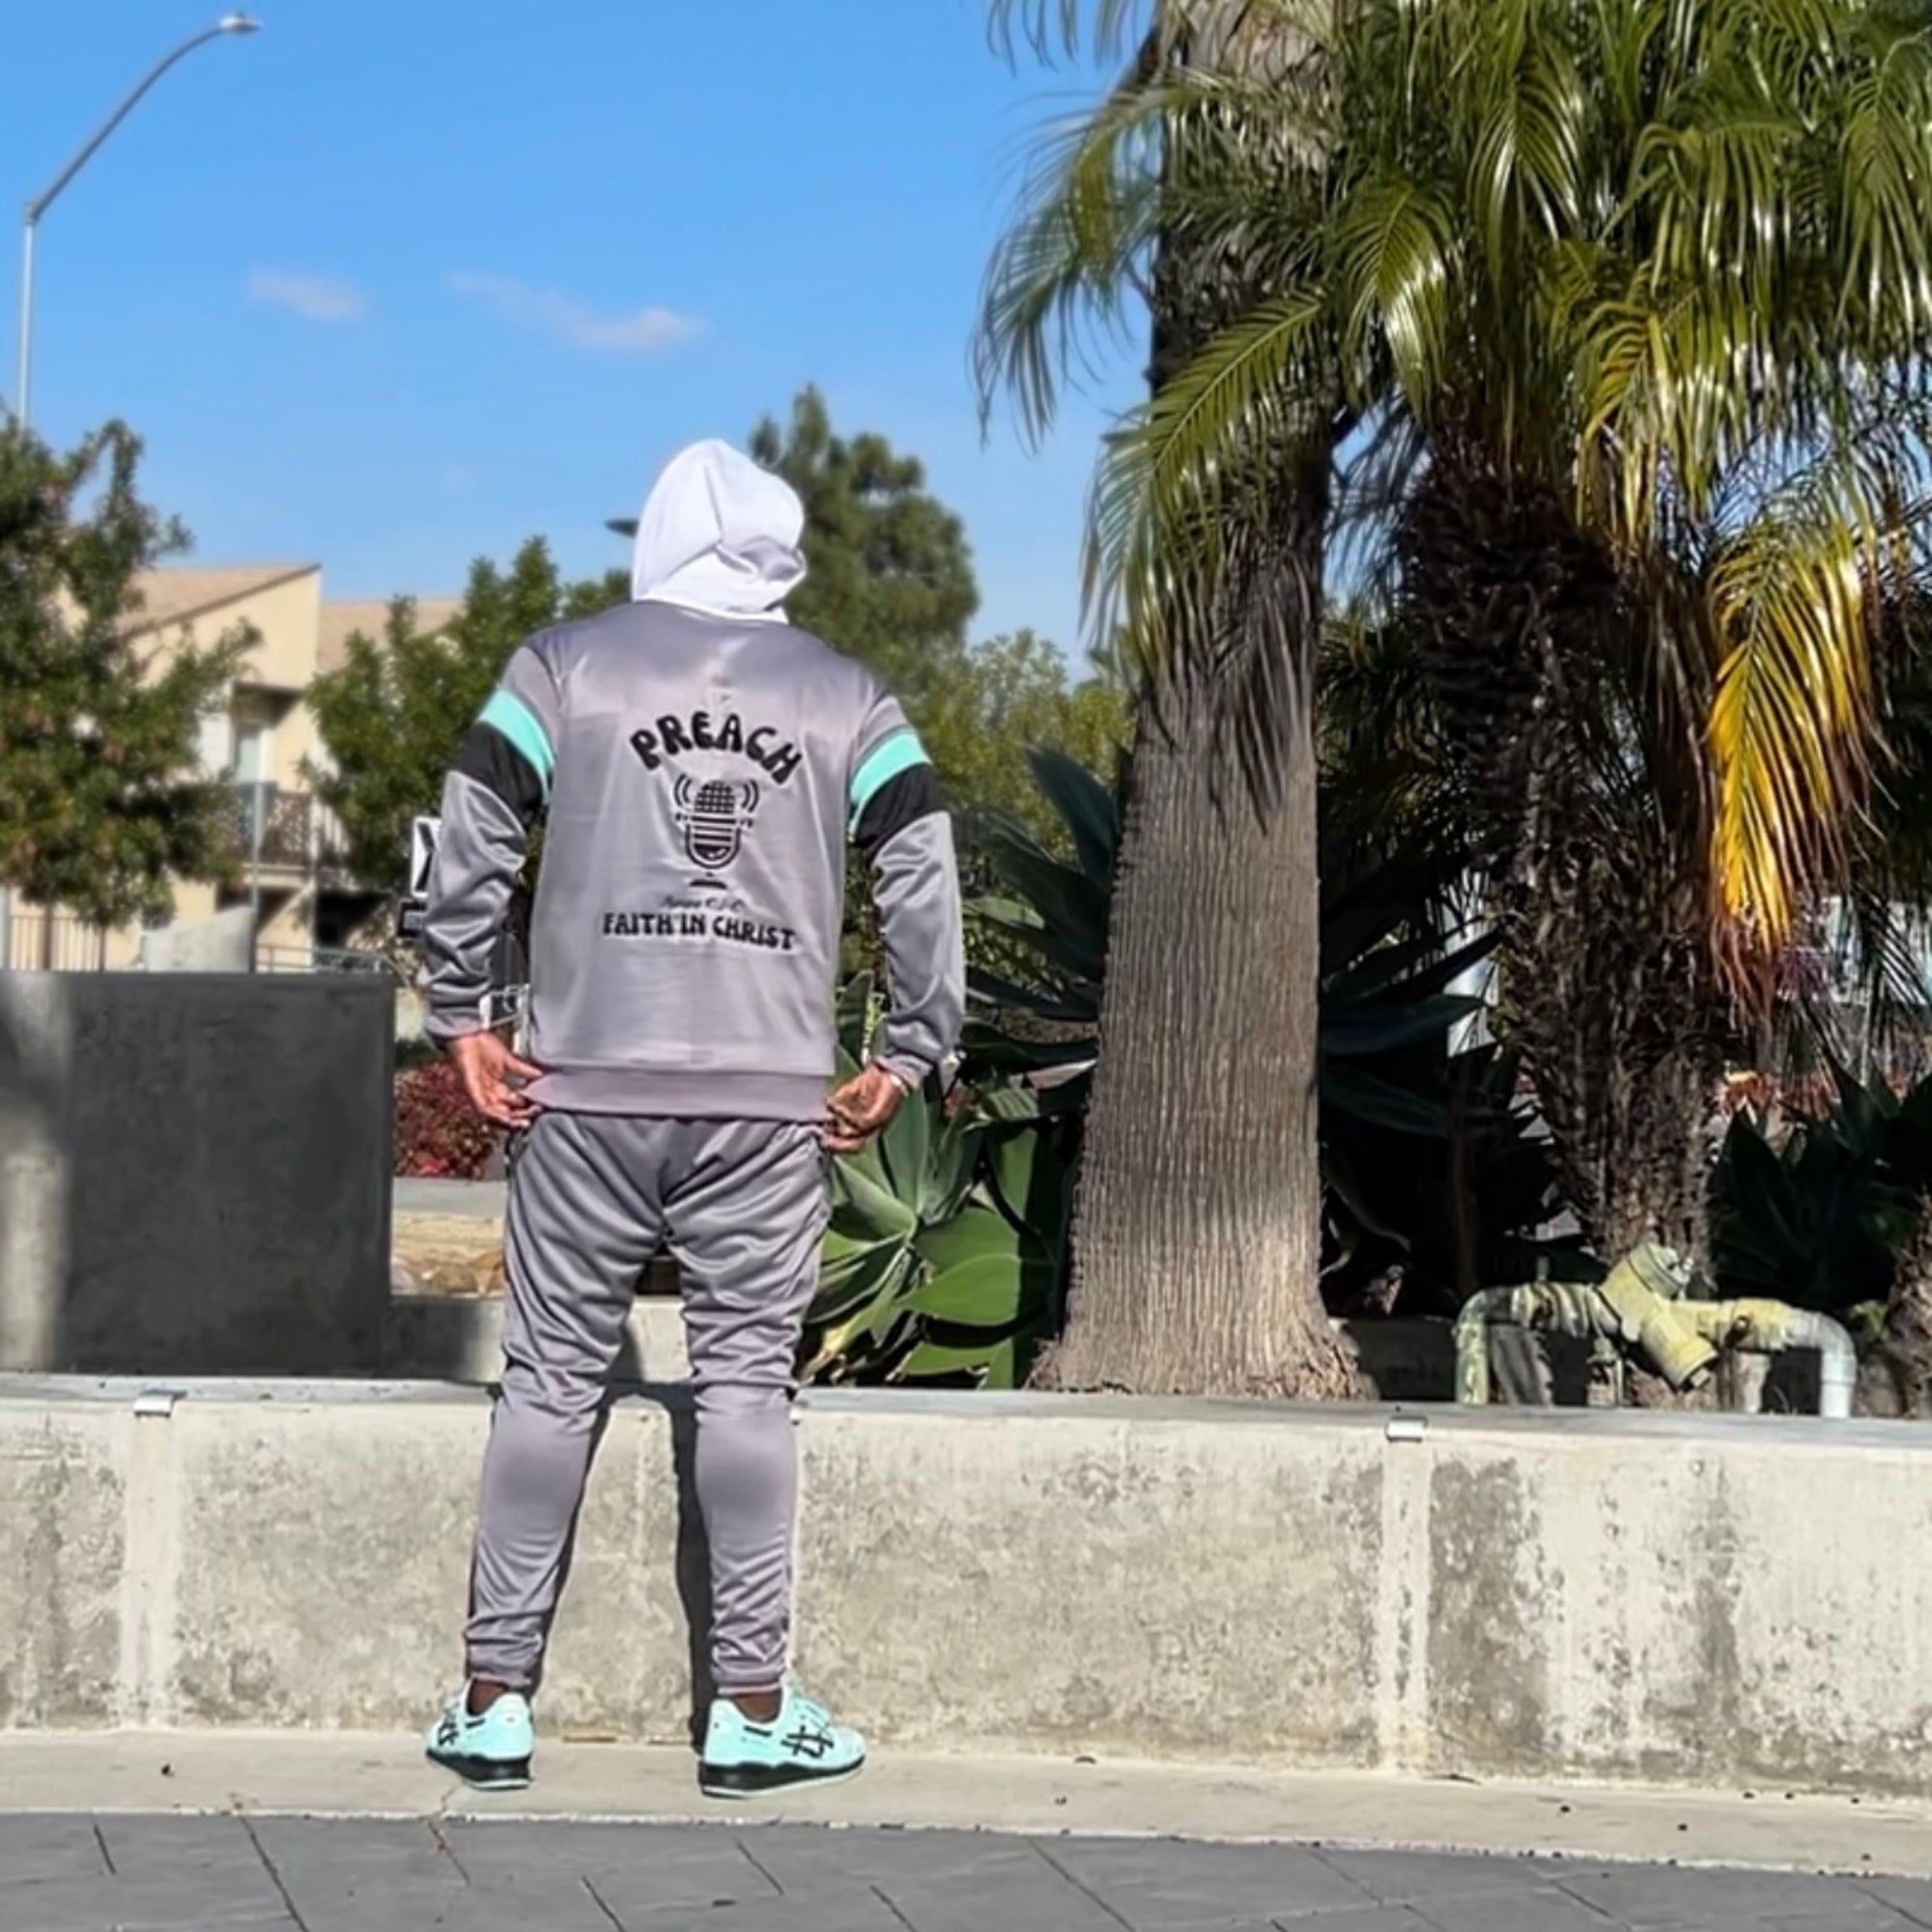 Preach Faith in Christ Tracksuit Set in Gray